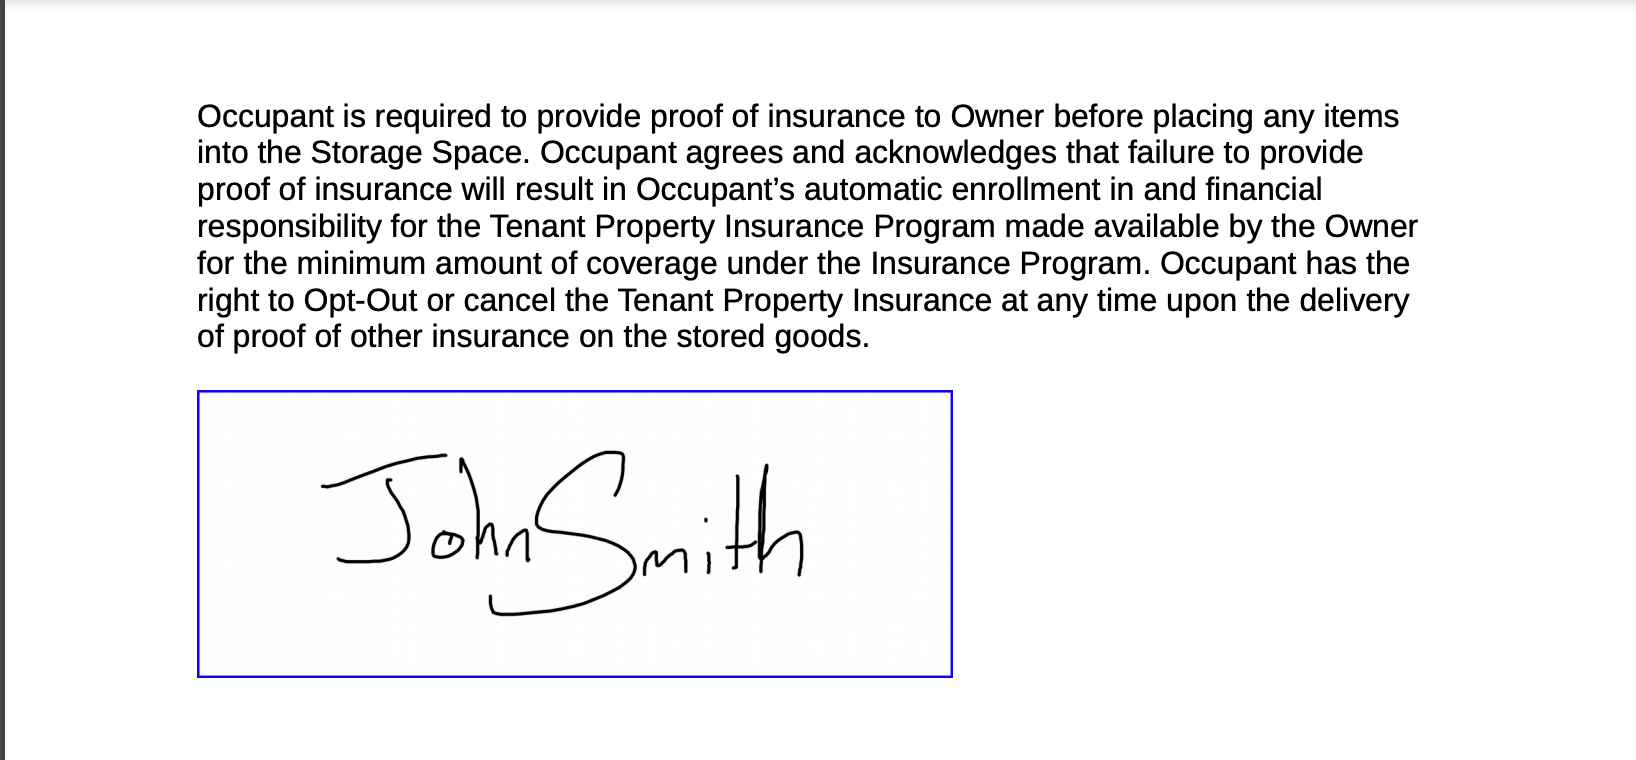 Auto enroll insurance agreement_.png